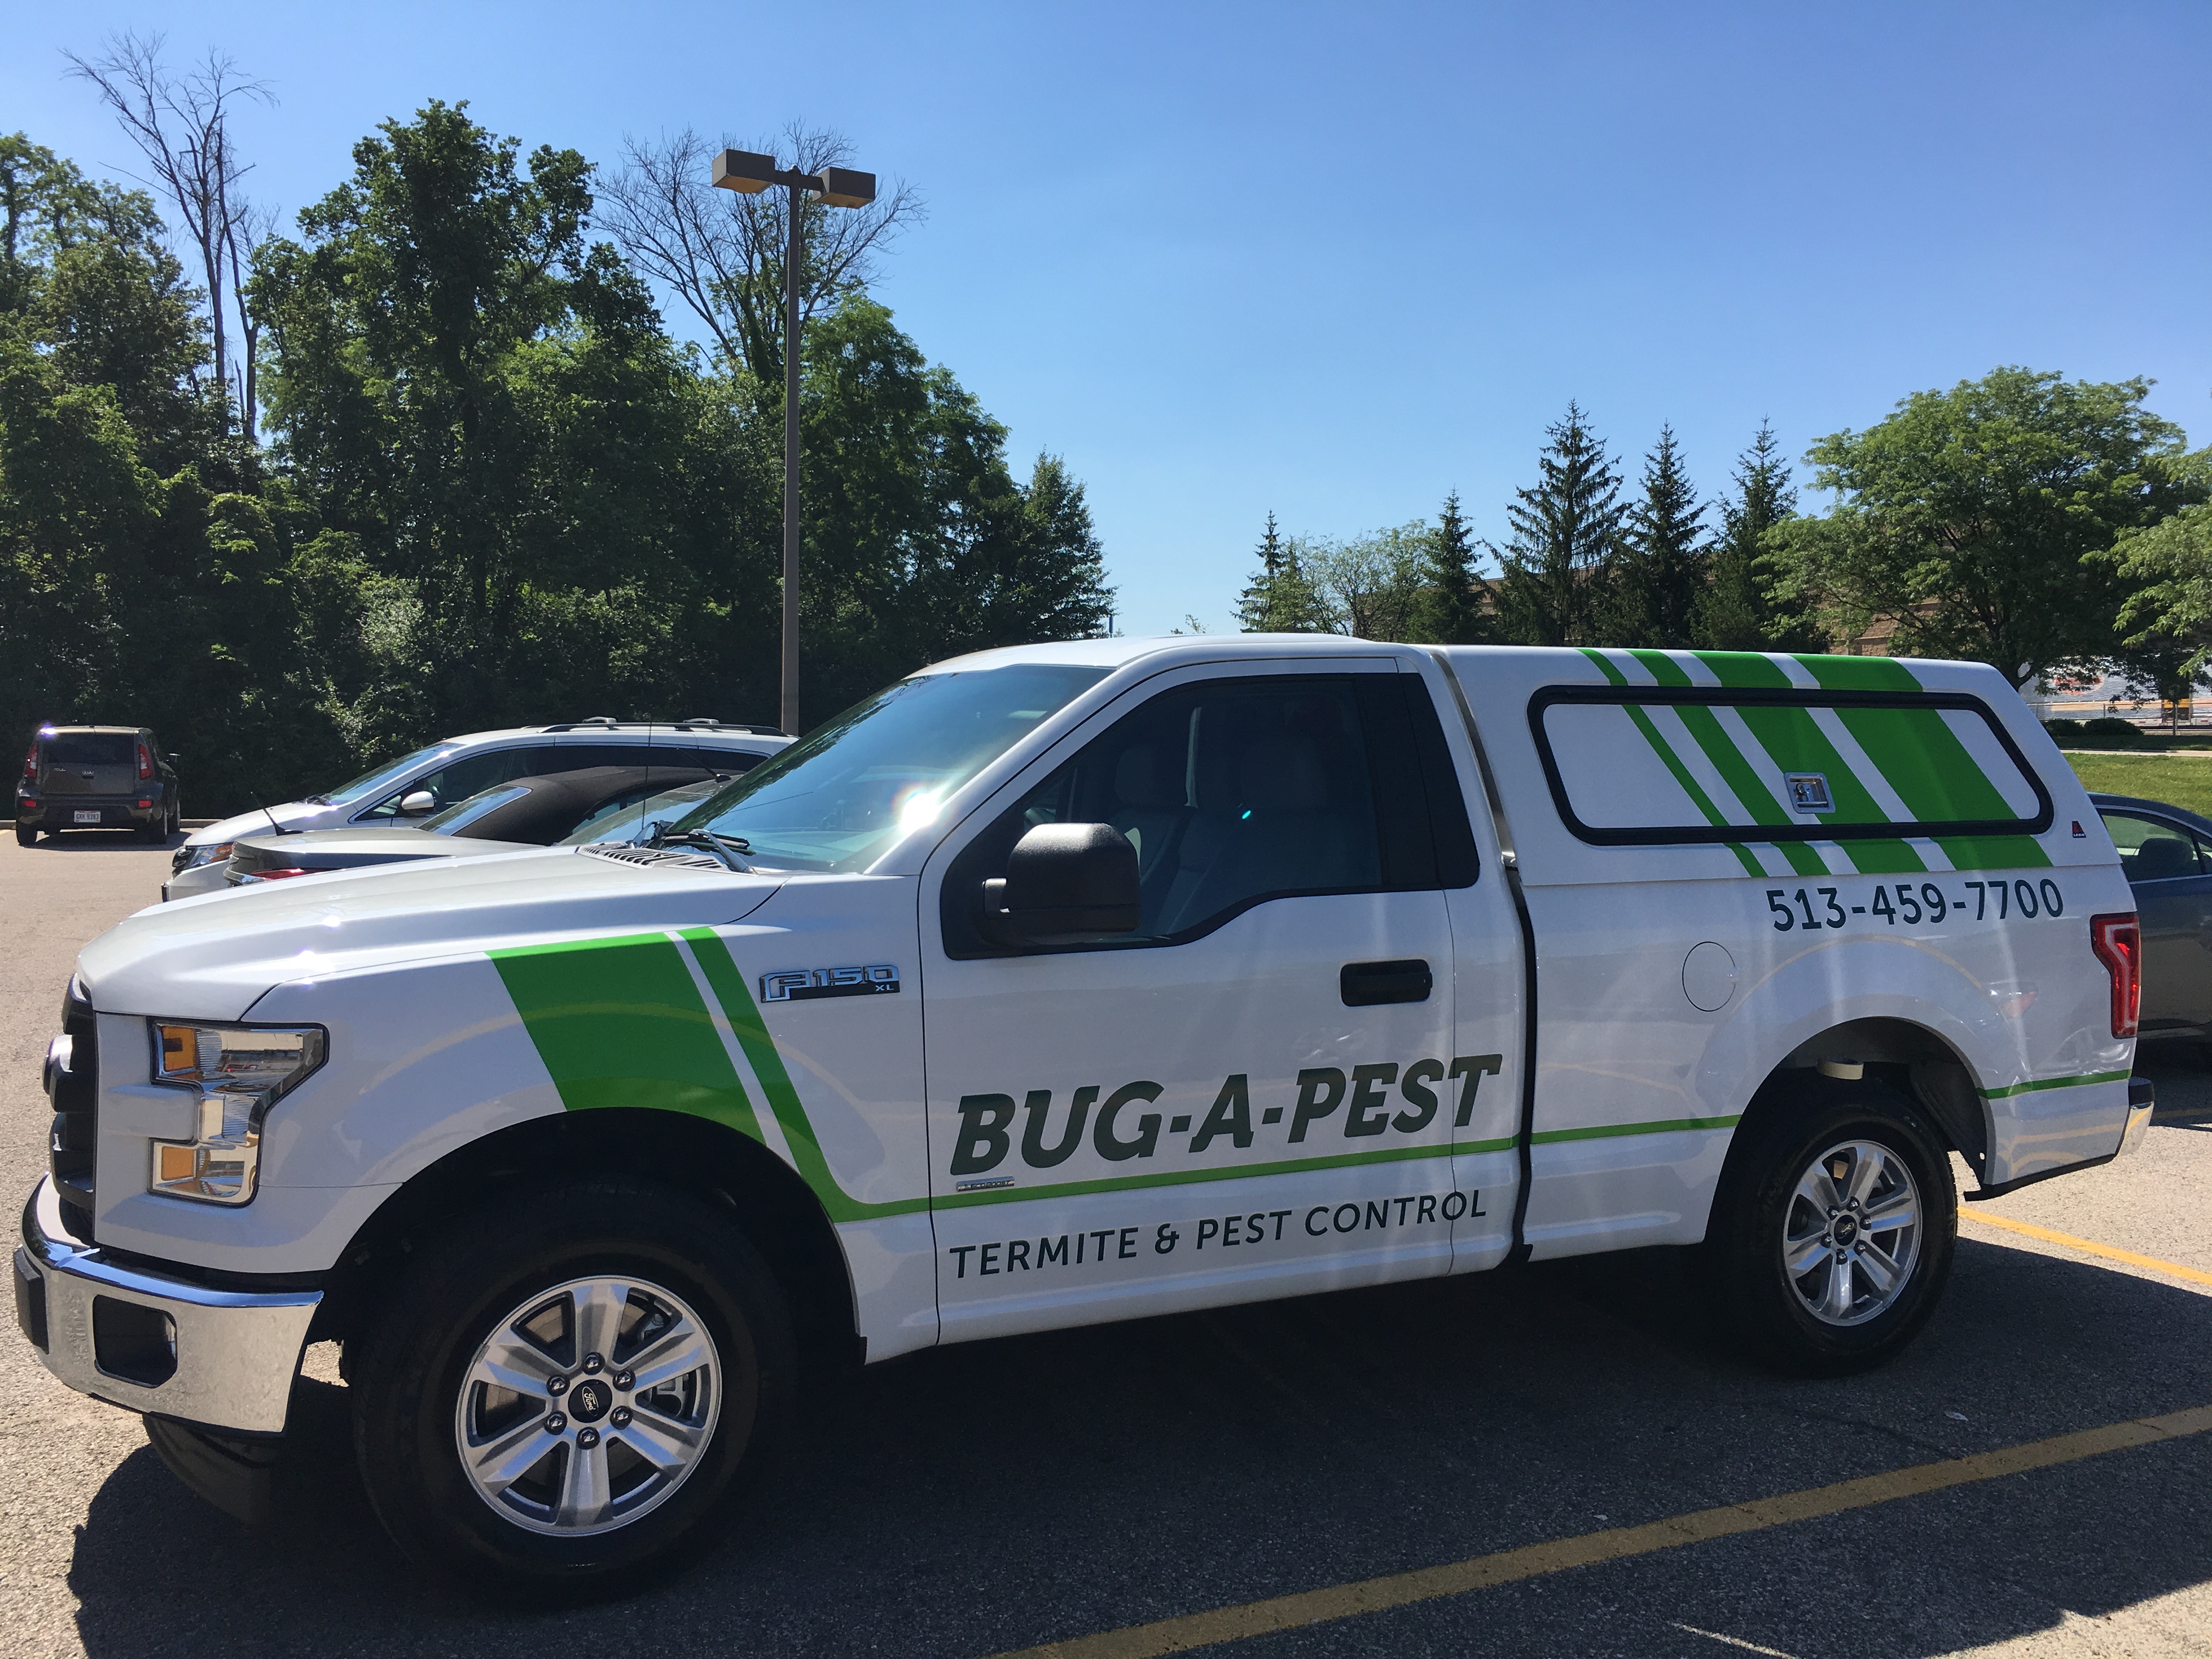 bug a pest truck with decal